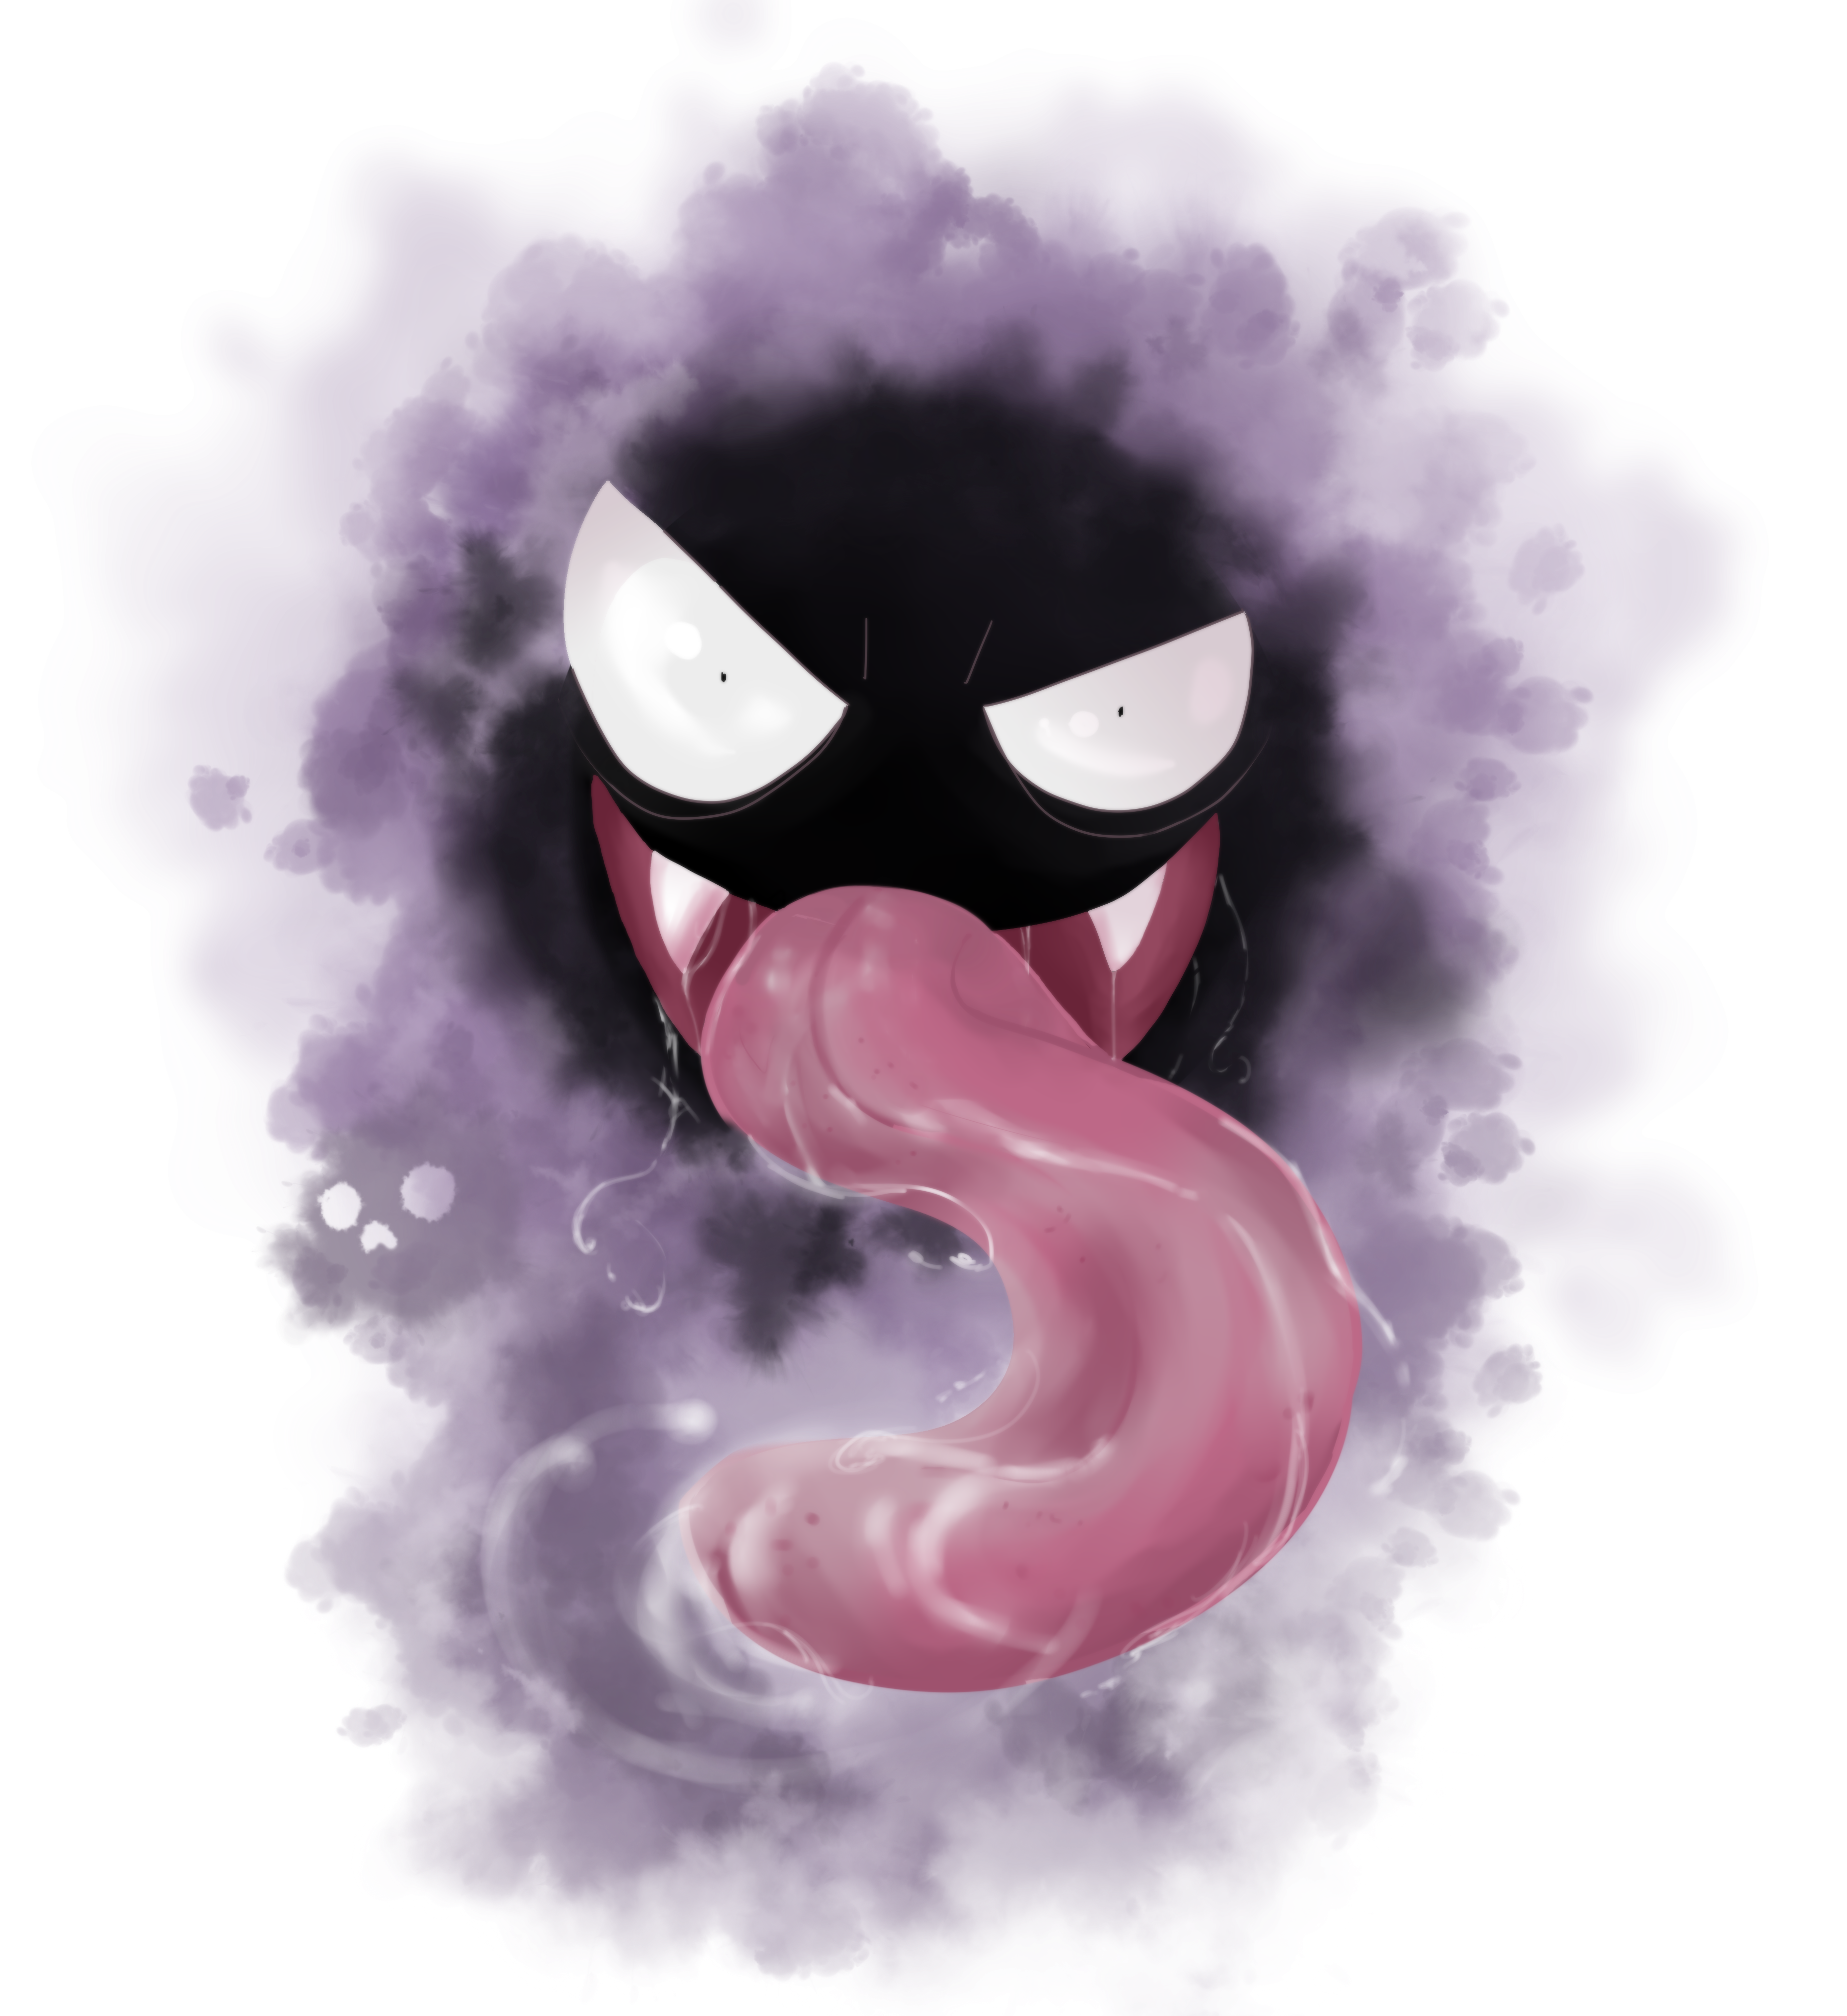 gastly-used-lick-by-thefredricus